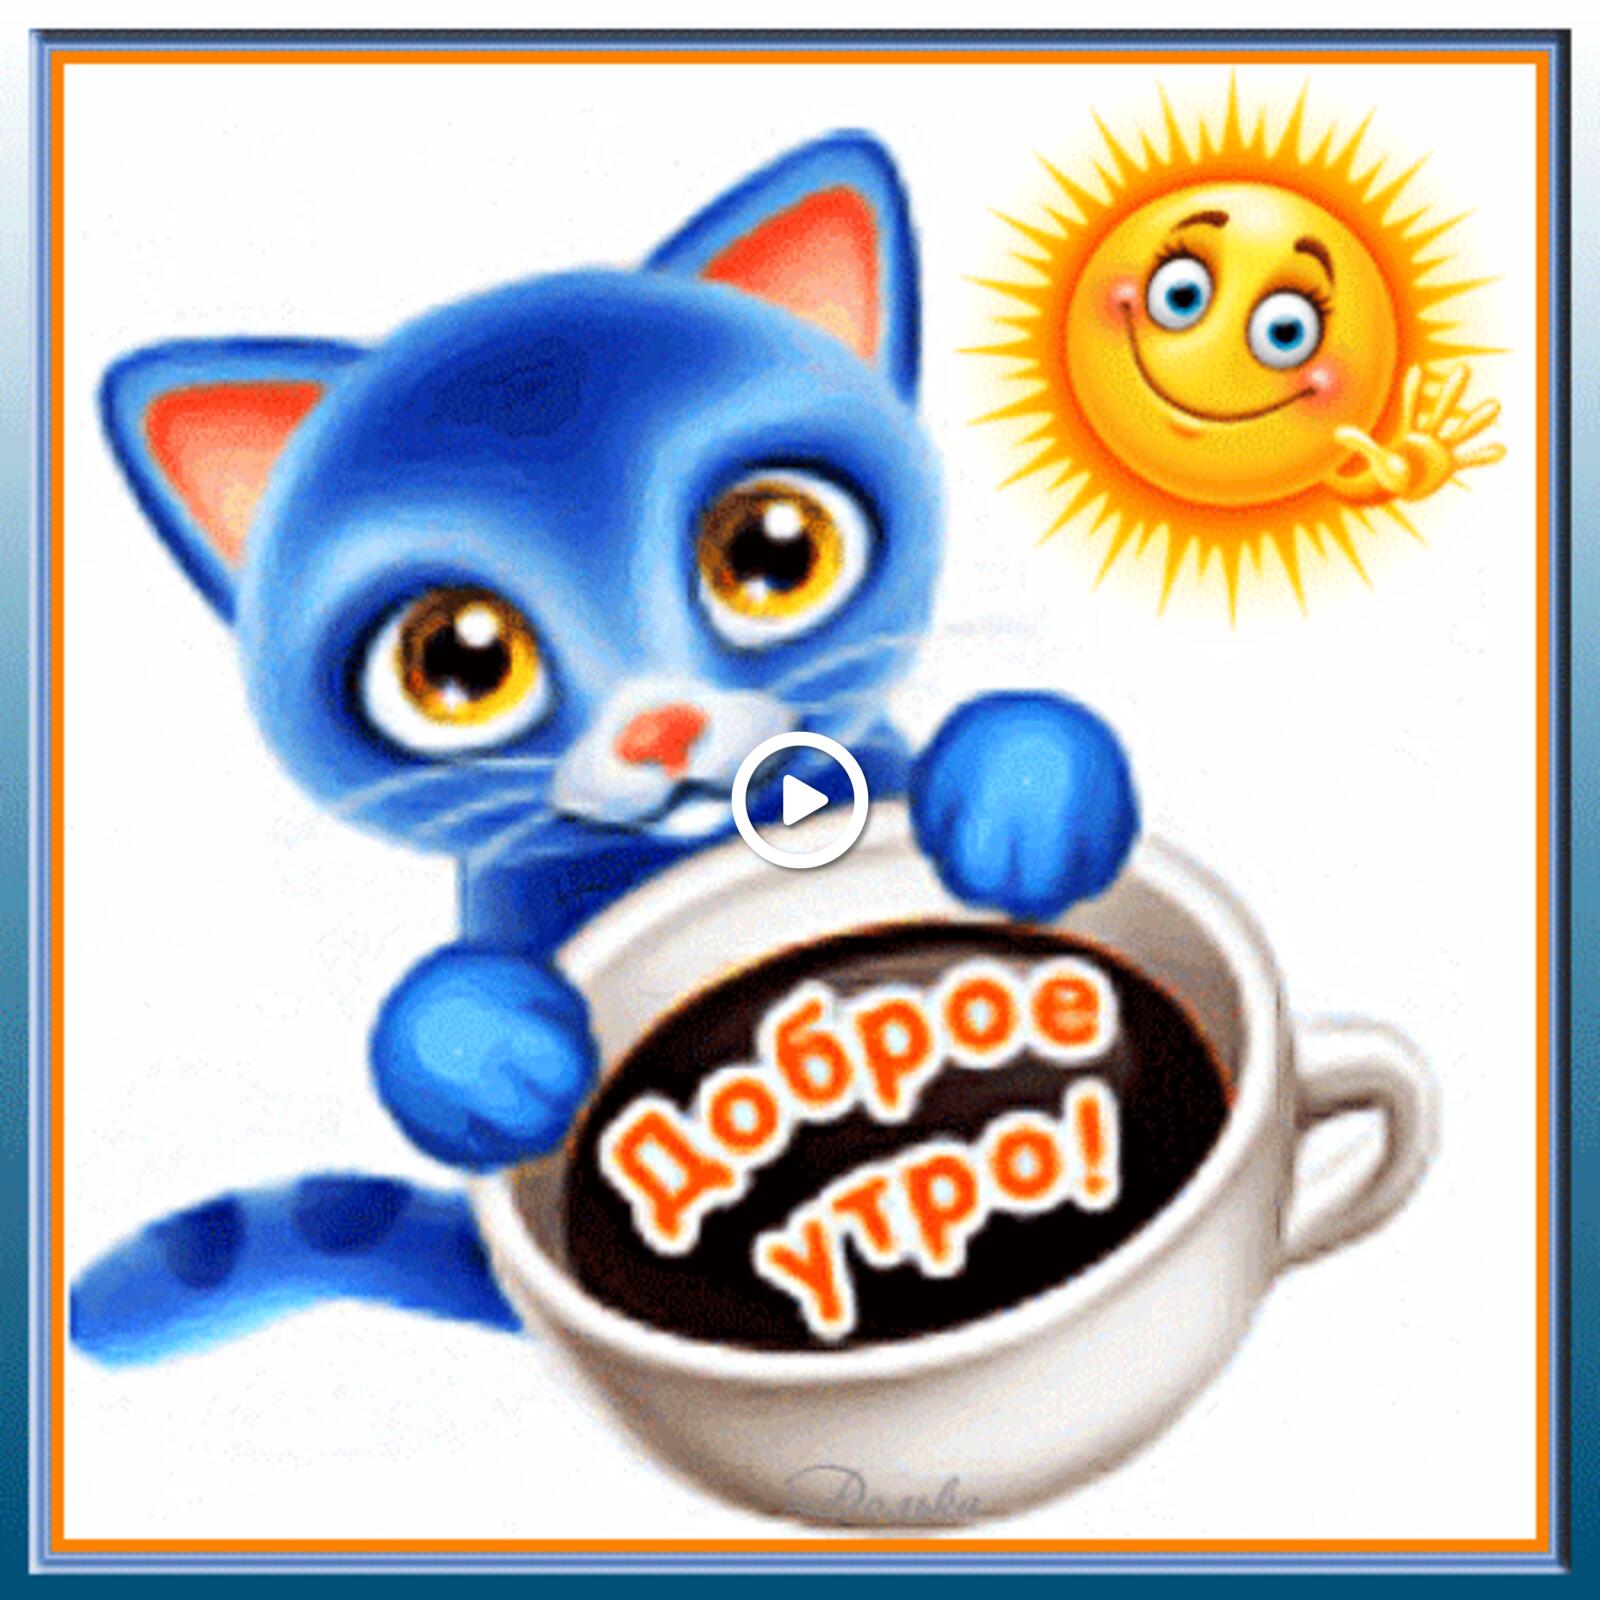 A postcard on the subject of good morning kitten a cup for free